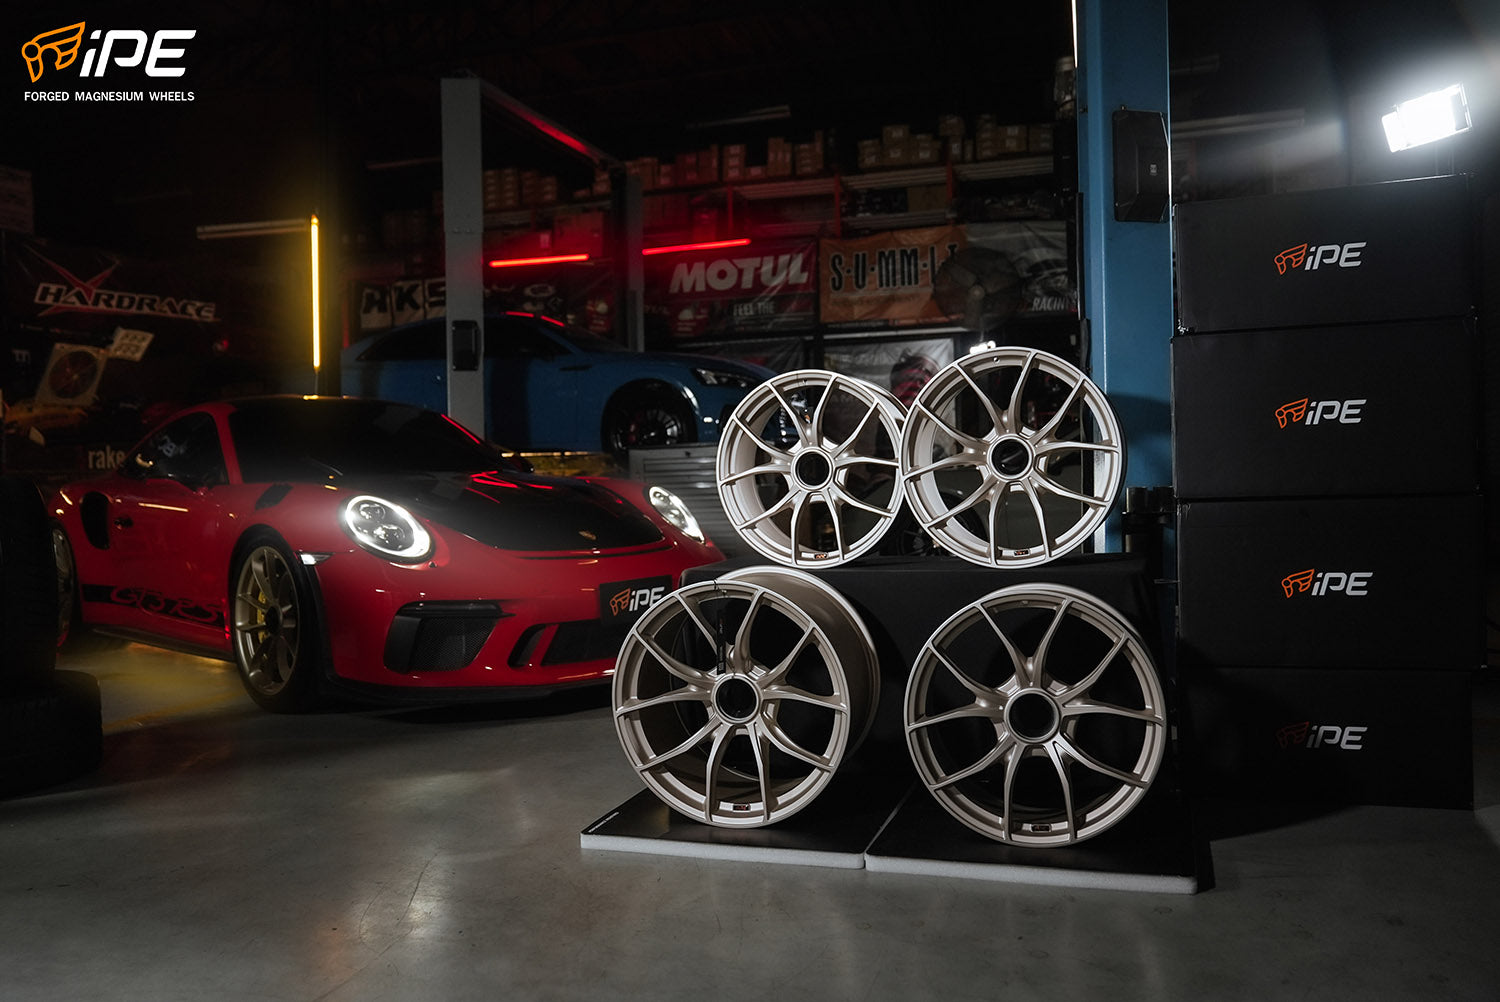 The photo depicts a dynamic automotive scene inside a well-lit garage. On the right, a stack of high-end, silver IPE wheel rims with intricate multi-spoke designs is showcased on a black display with the iPE logo. In the background, a vibrant red Porsche with black details sits prominently. The garage itself is lined with automotive parts and branding. The overall composition combines the allure of advanced auto parts with the prestige of sports car culture.